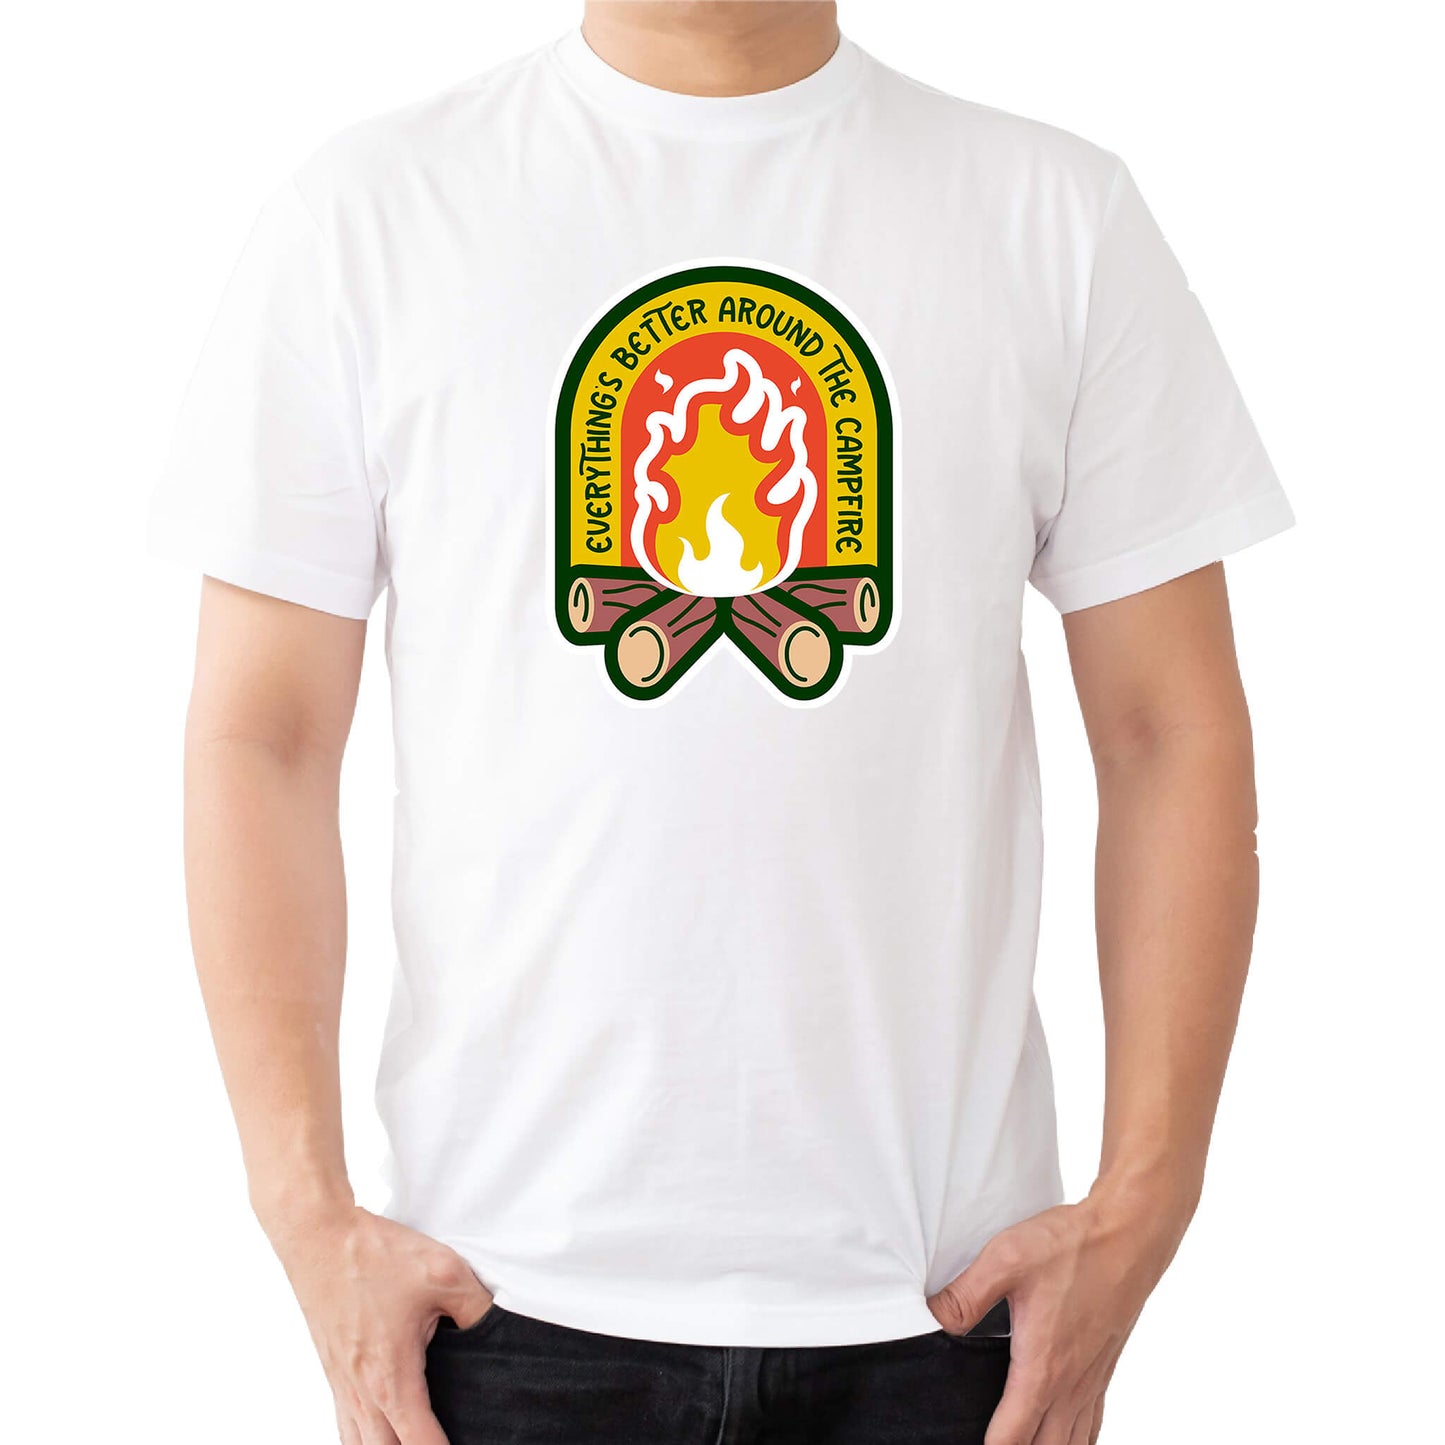 "white Cozy tee featuring a campfire image, perfect for outdoor enthusiasts. Text says: 'Everything is better around the campfire.' Embrace the warmth and camaraderie!"